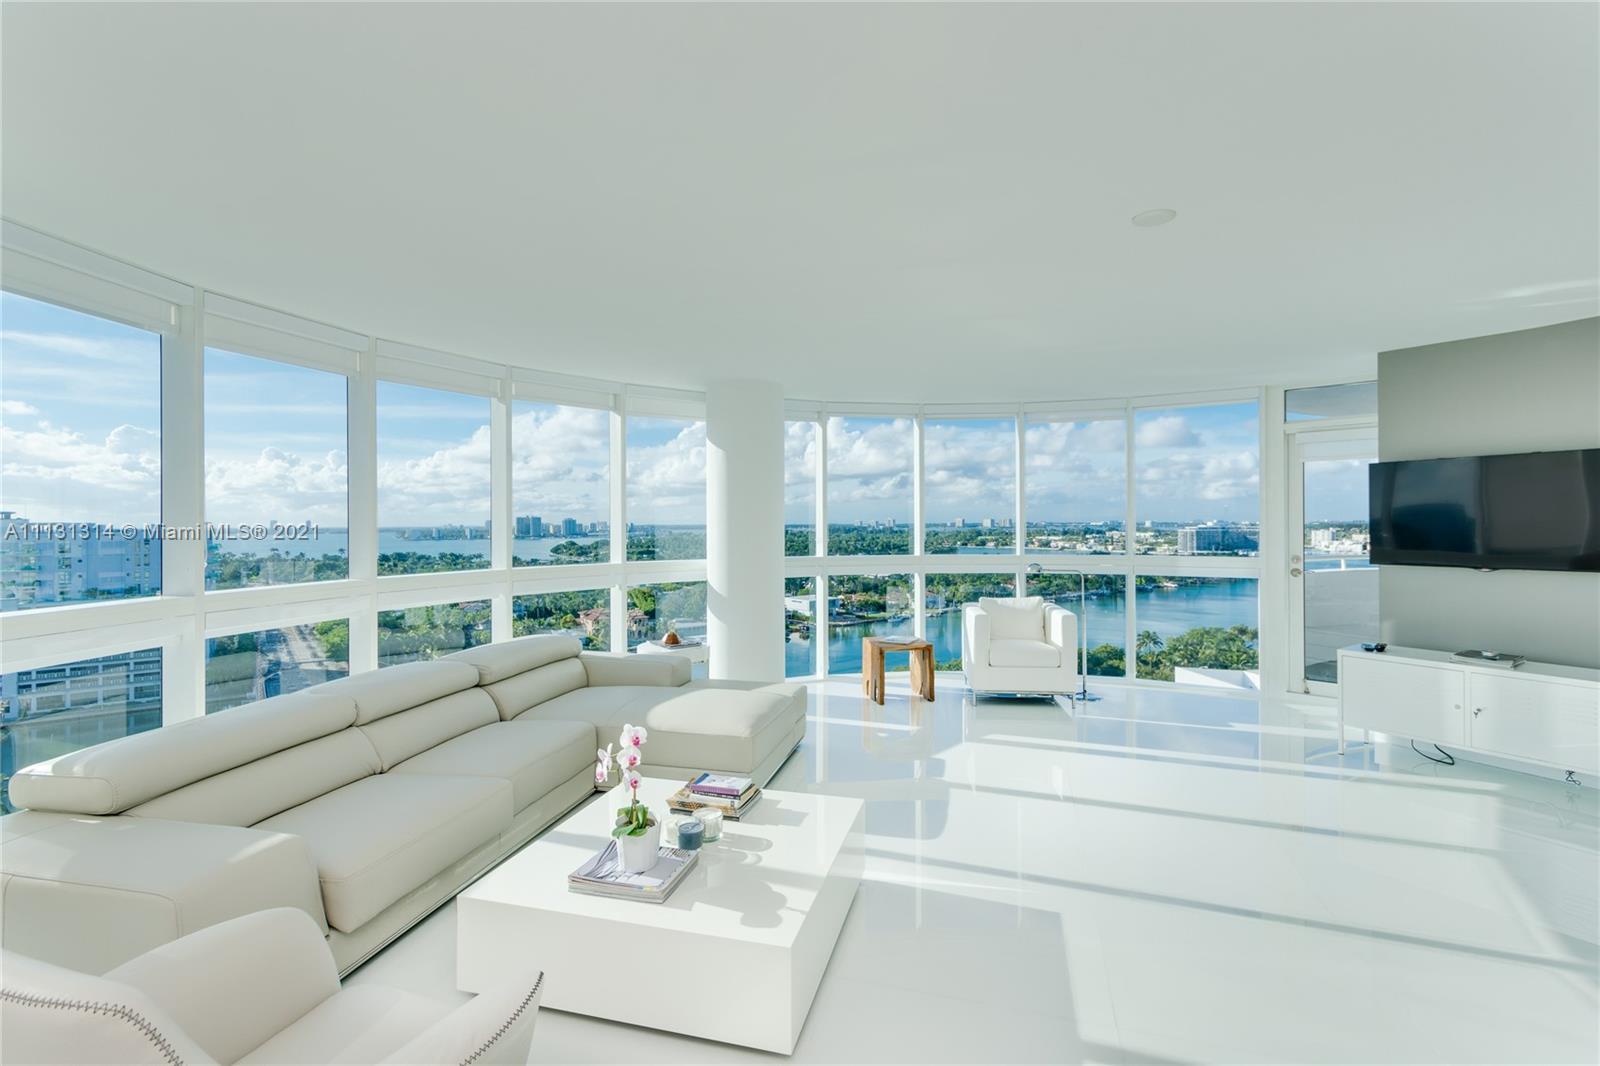 Amazing unit at La Gorce Palace, with 2 balconies, and a cristal view on this round glass living roo